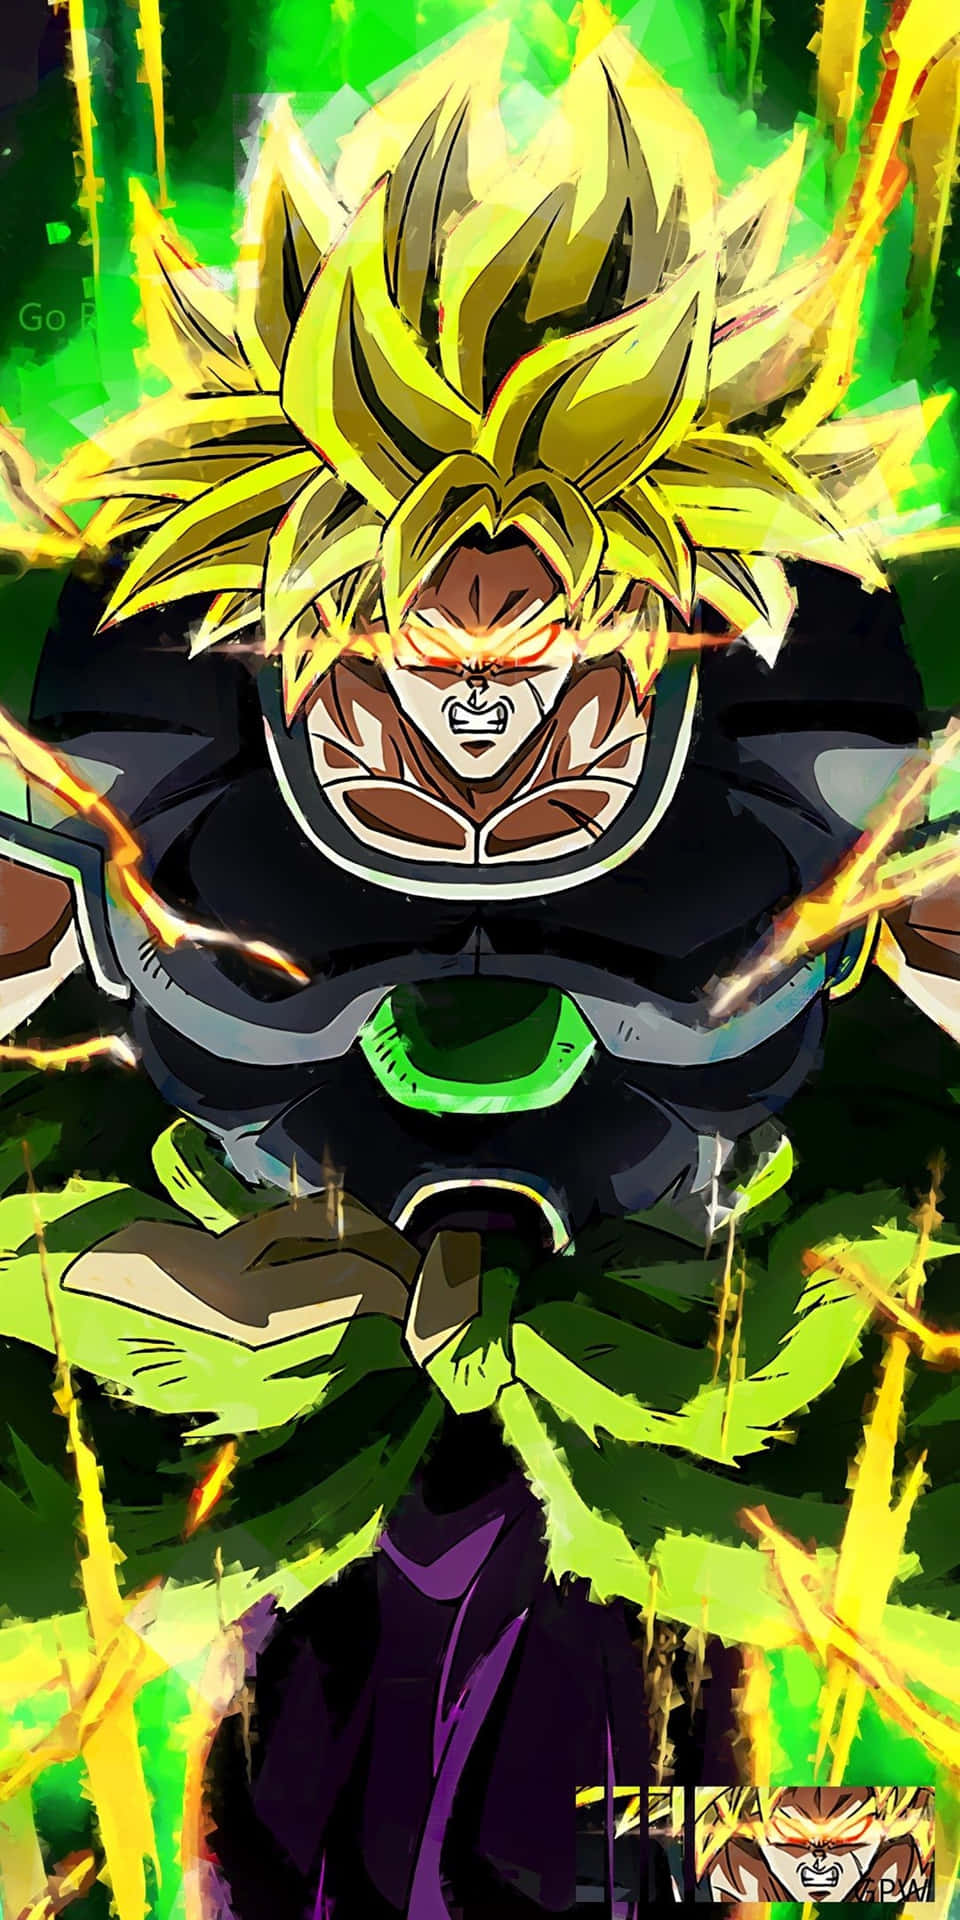 Background Broly 4K Wallpaper Discover more Anime Broly 4K Character  Dragon Ball series Fictional wallpap  Dragon ball super manga Hero  wallpaper Wallpaper